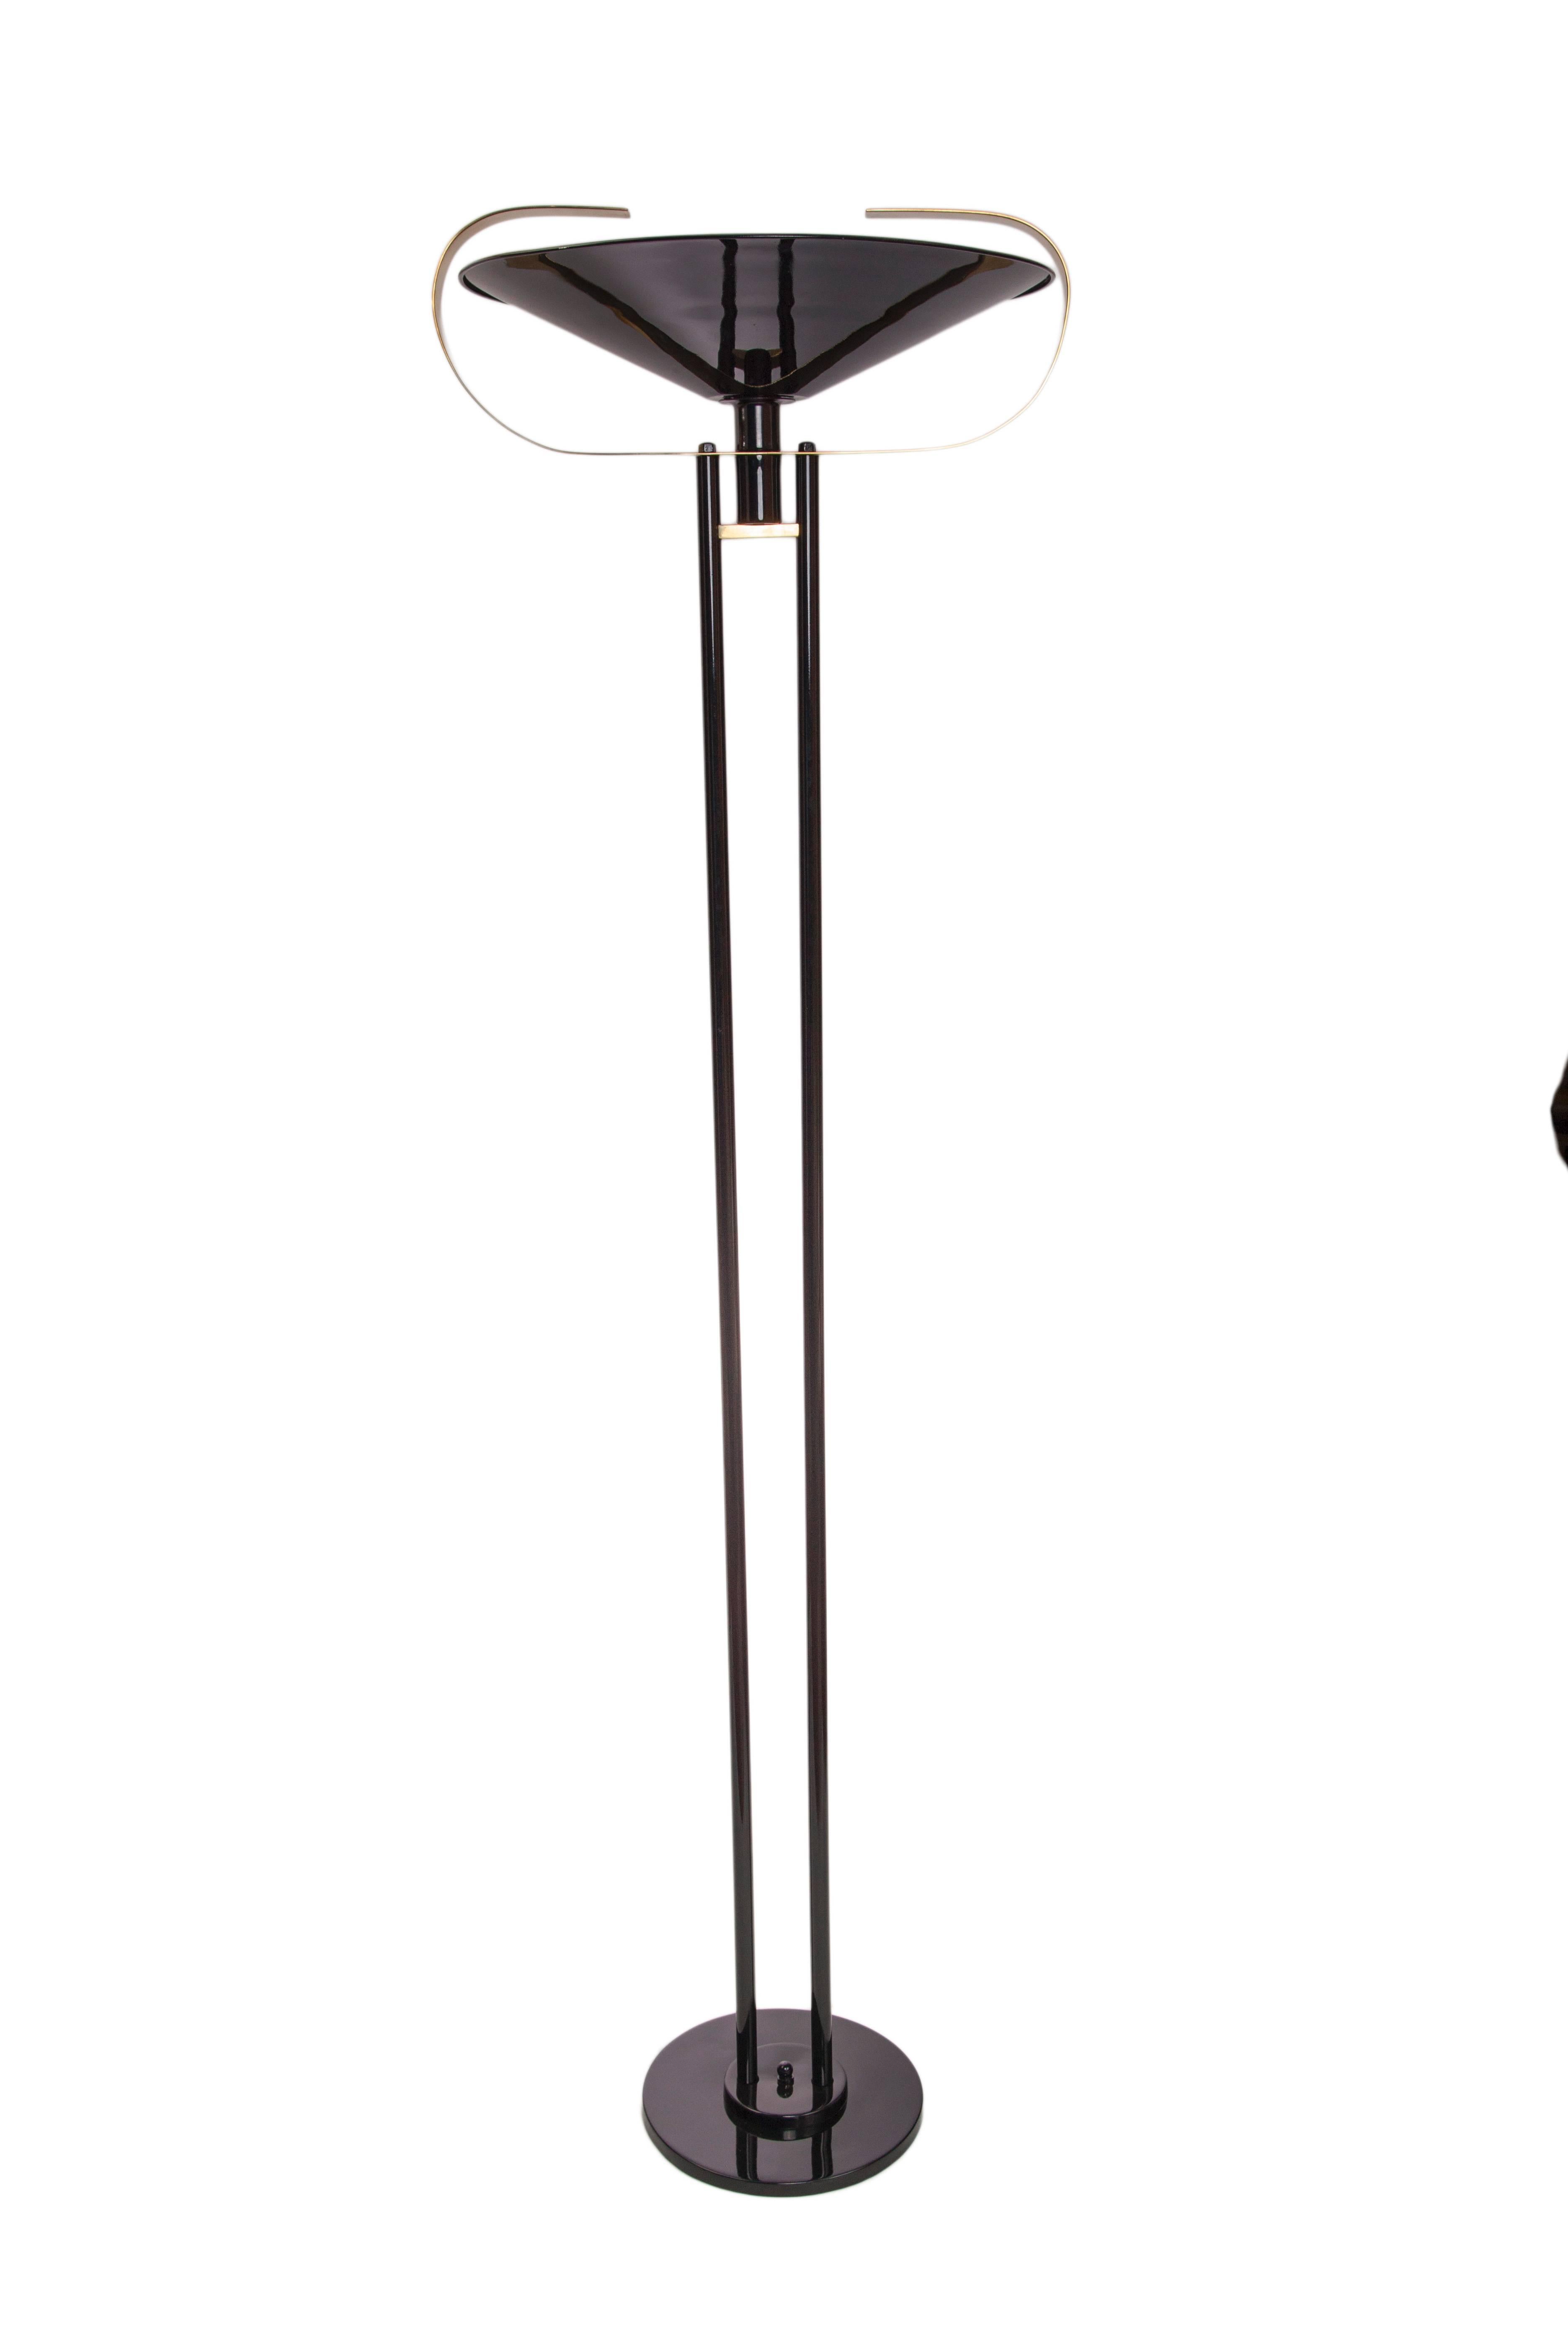 A modernistic torchiere floor lamp, produced circa 1950s in black enameled metal with dual stem, the inverted shade accented with curved brass bands. Very good vintage condition, wear consistent with age and use.